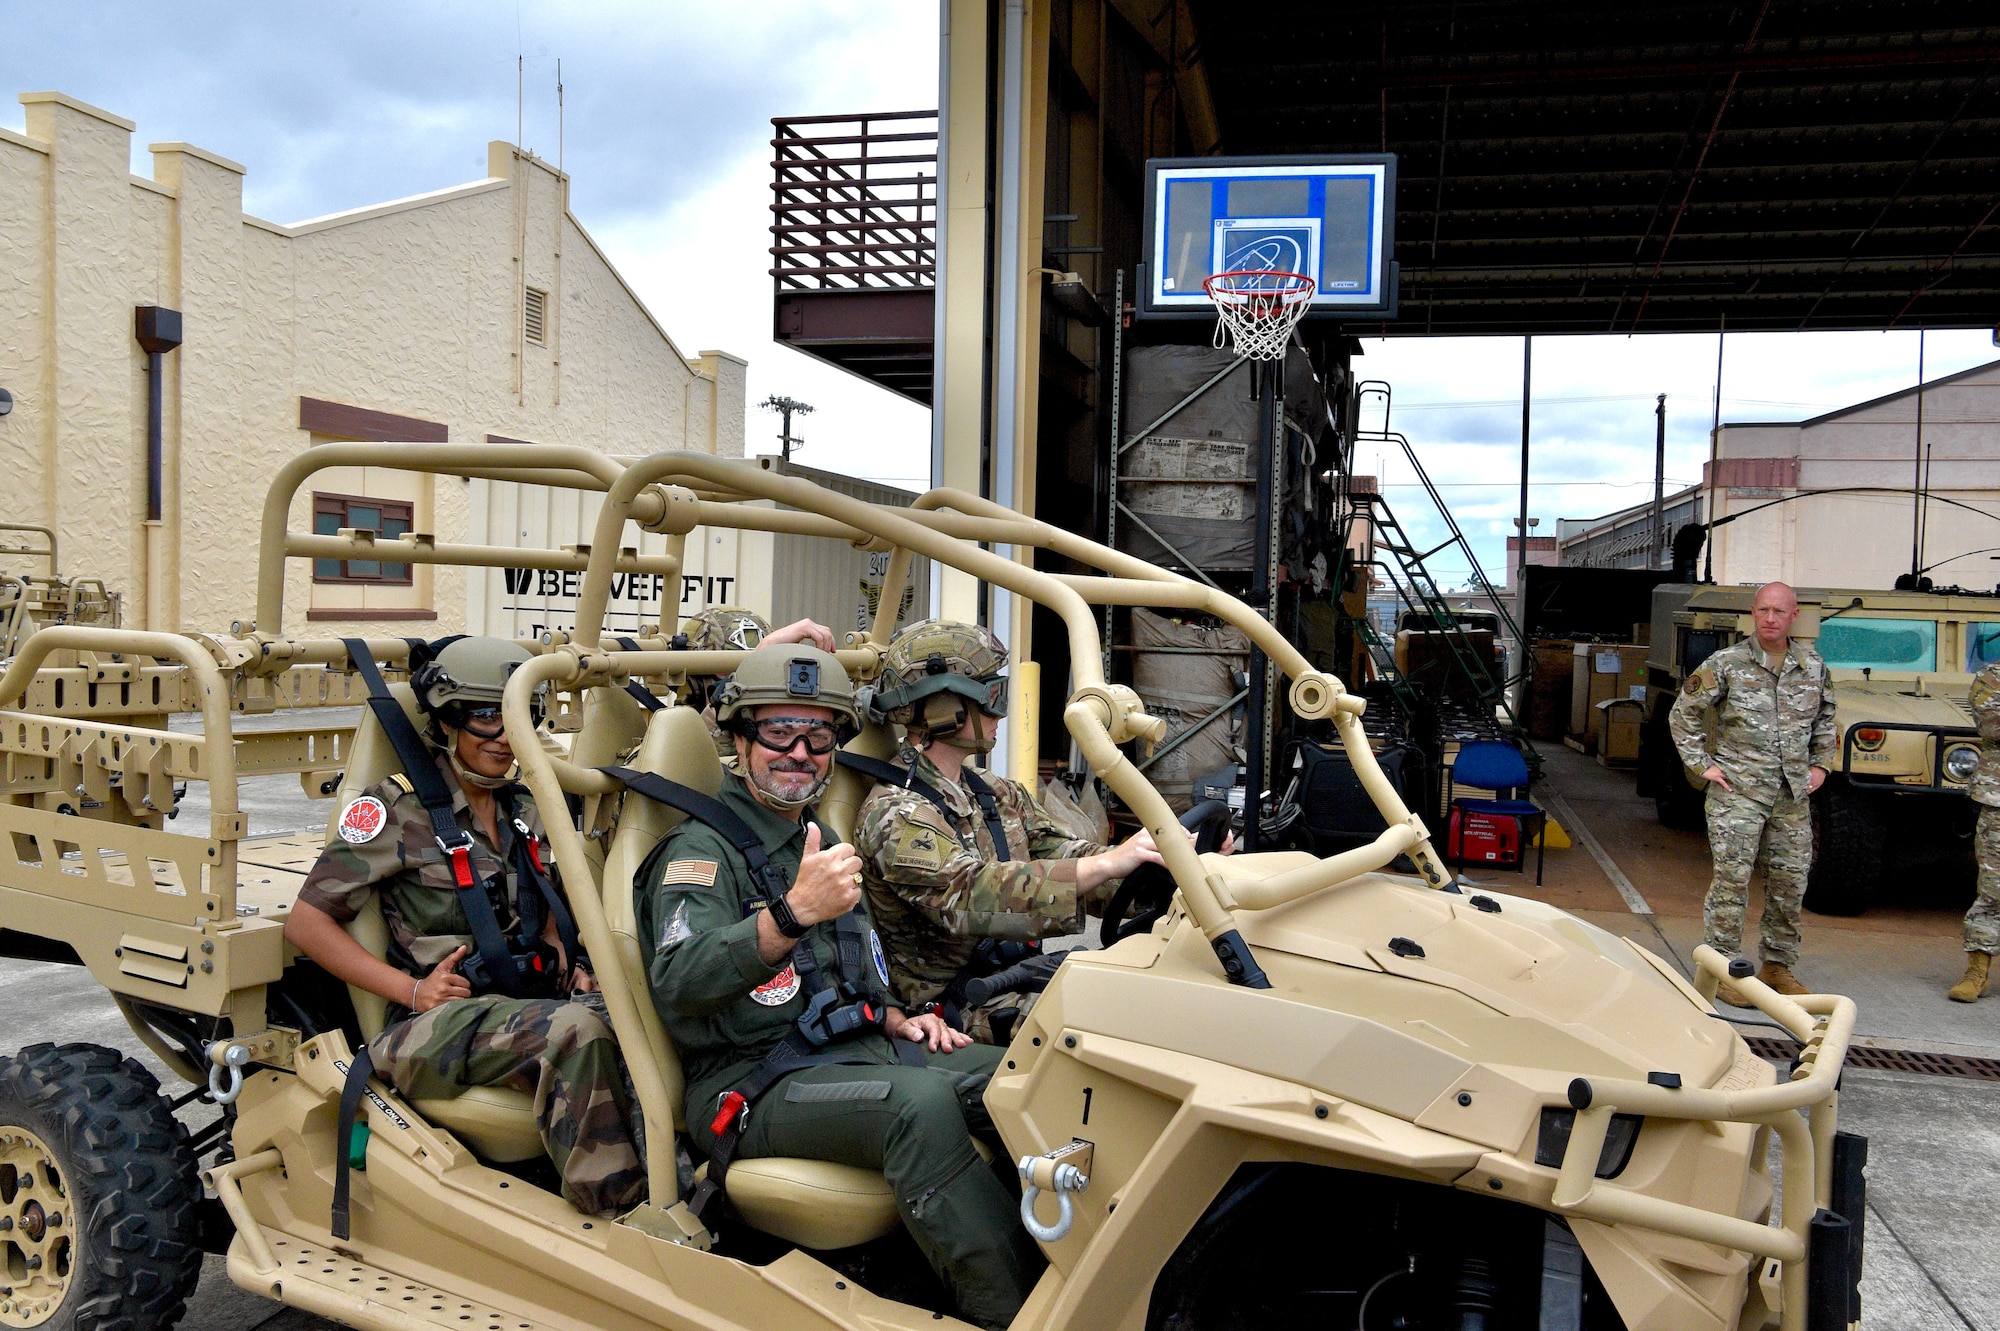 French Air Force Gen. Louis Pena, talks with the members from the 25th Air Support and Operations Squadron to learn about the mission of the Tactical Air Control Party Airmen at Wheeler Army Airfield, Hawaii, June 30, 2021. Pena was briefed on the capabilities of the 25th ASOS and given a demonstration of the Polaris MRZR, a multi-terrain vehicle used by TACP Airmen. (U.S. Air Force photos by 2nd Lt. Benjamin Aronson)